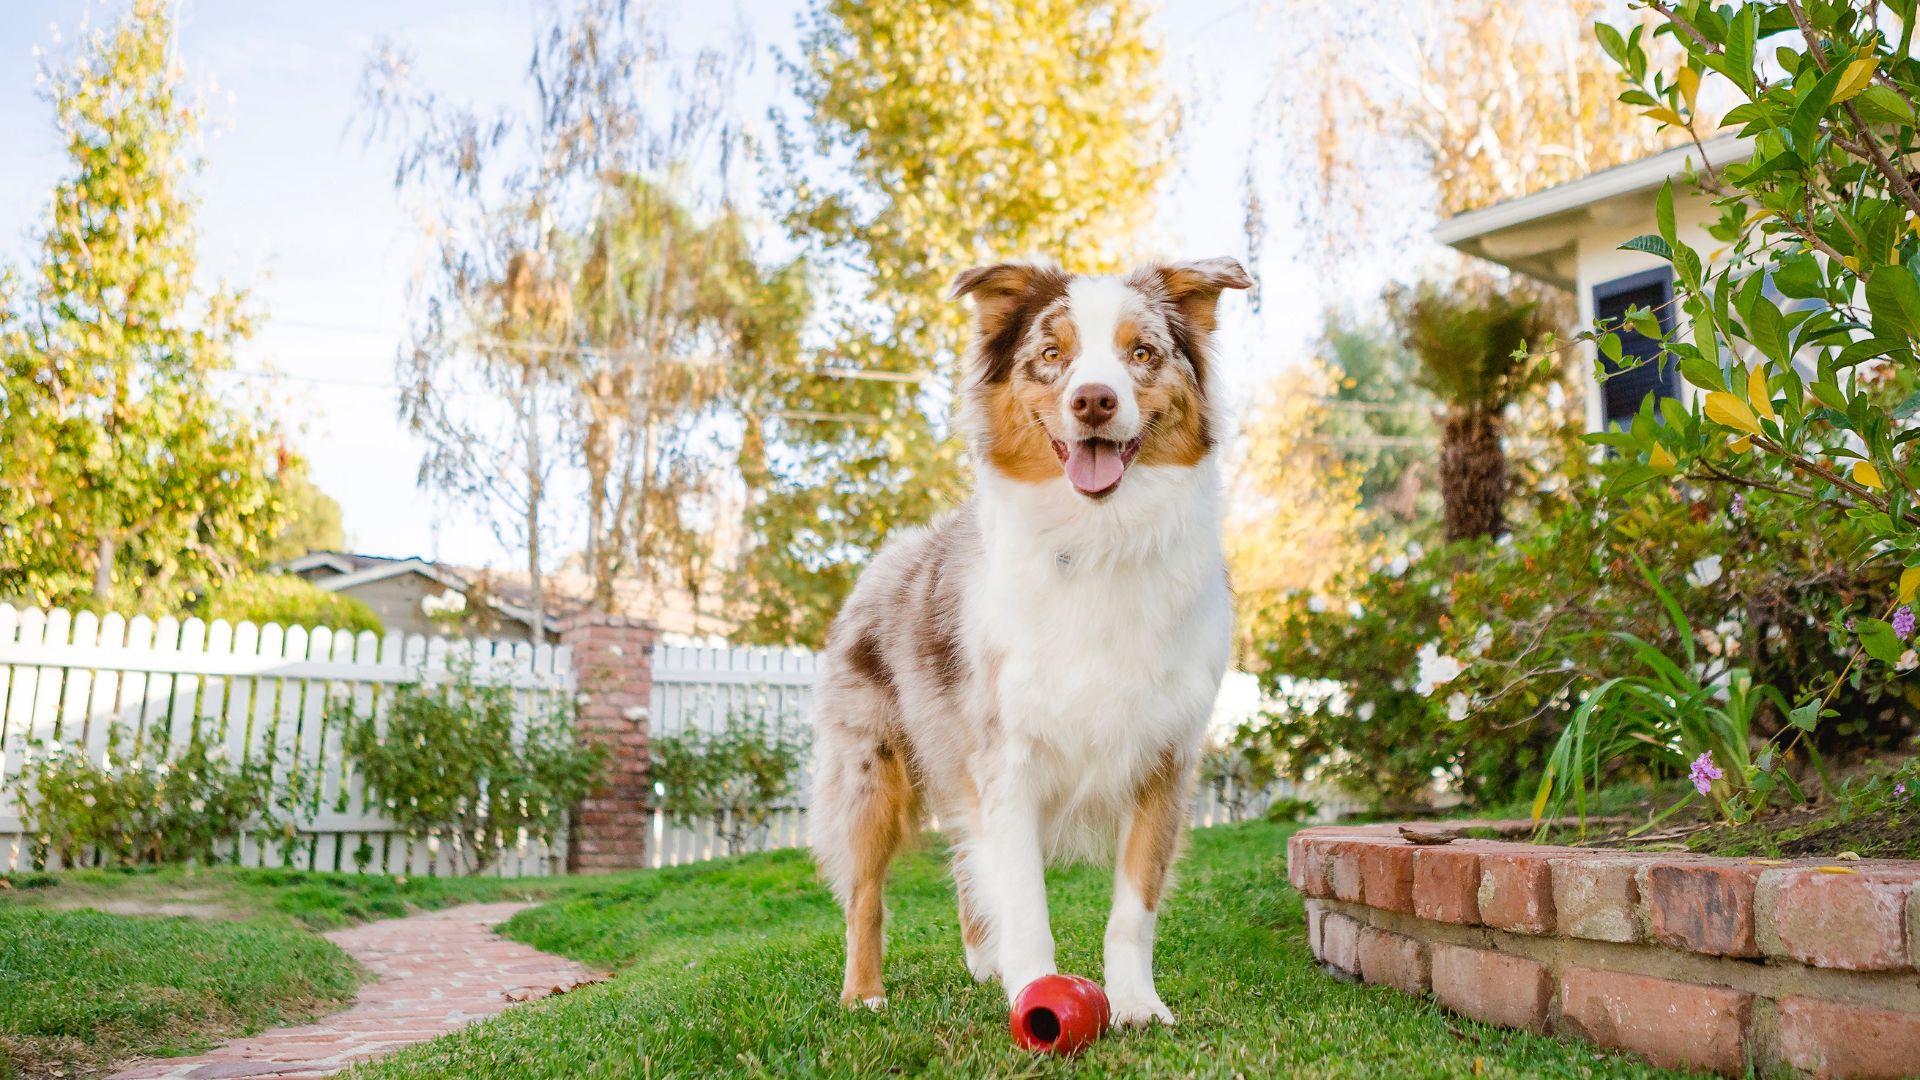 If You Want To Create A Dog-Friendly Garden, Use These 13 Easy Ways